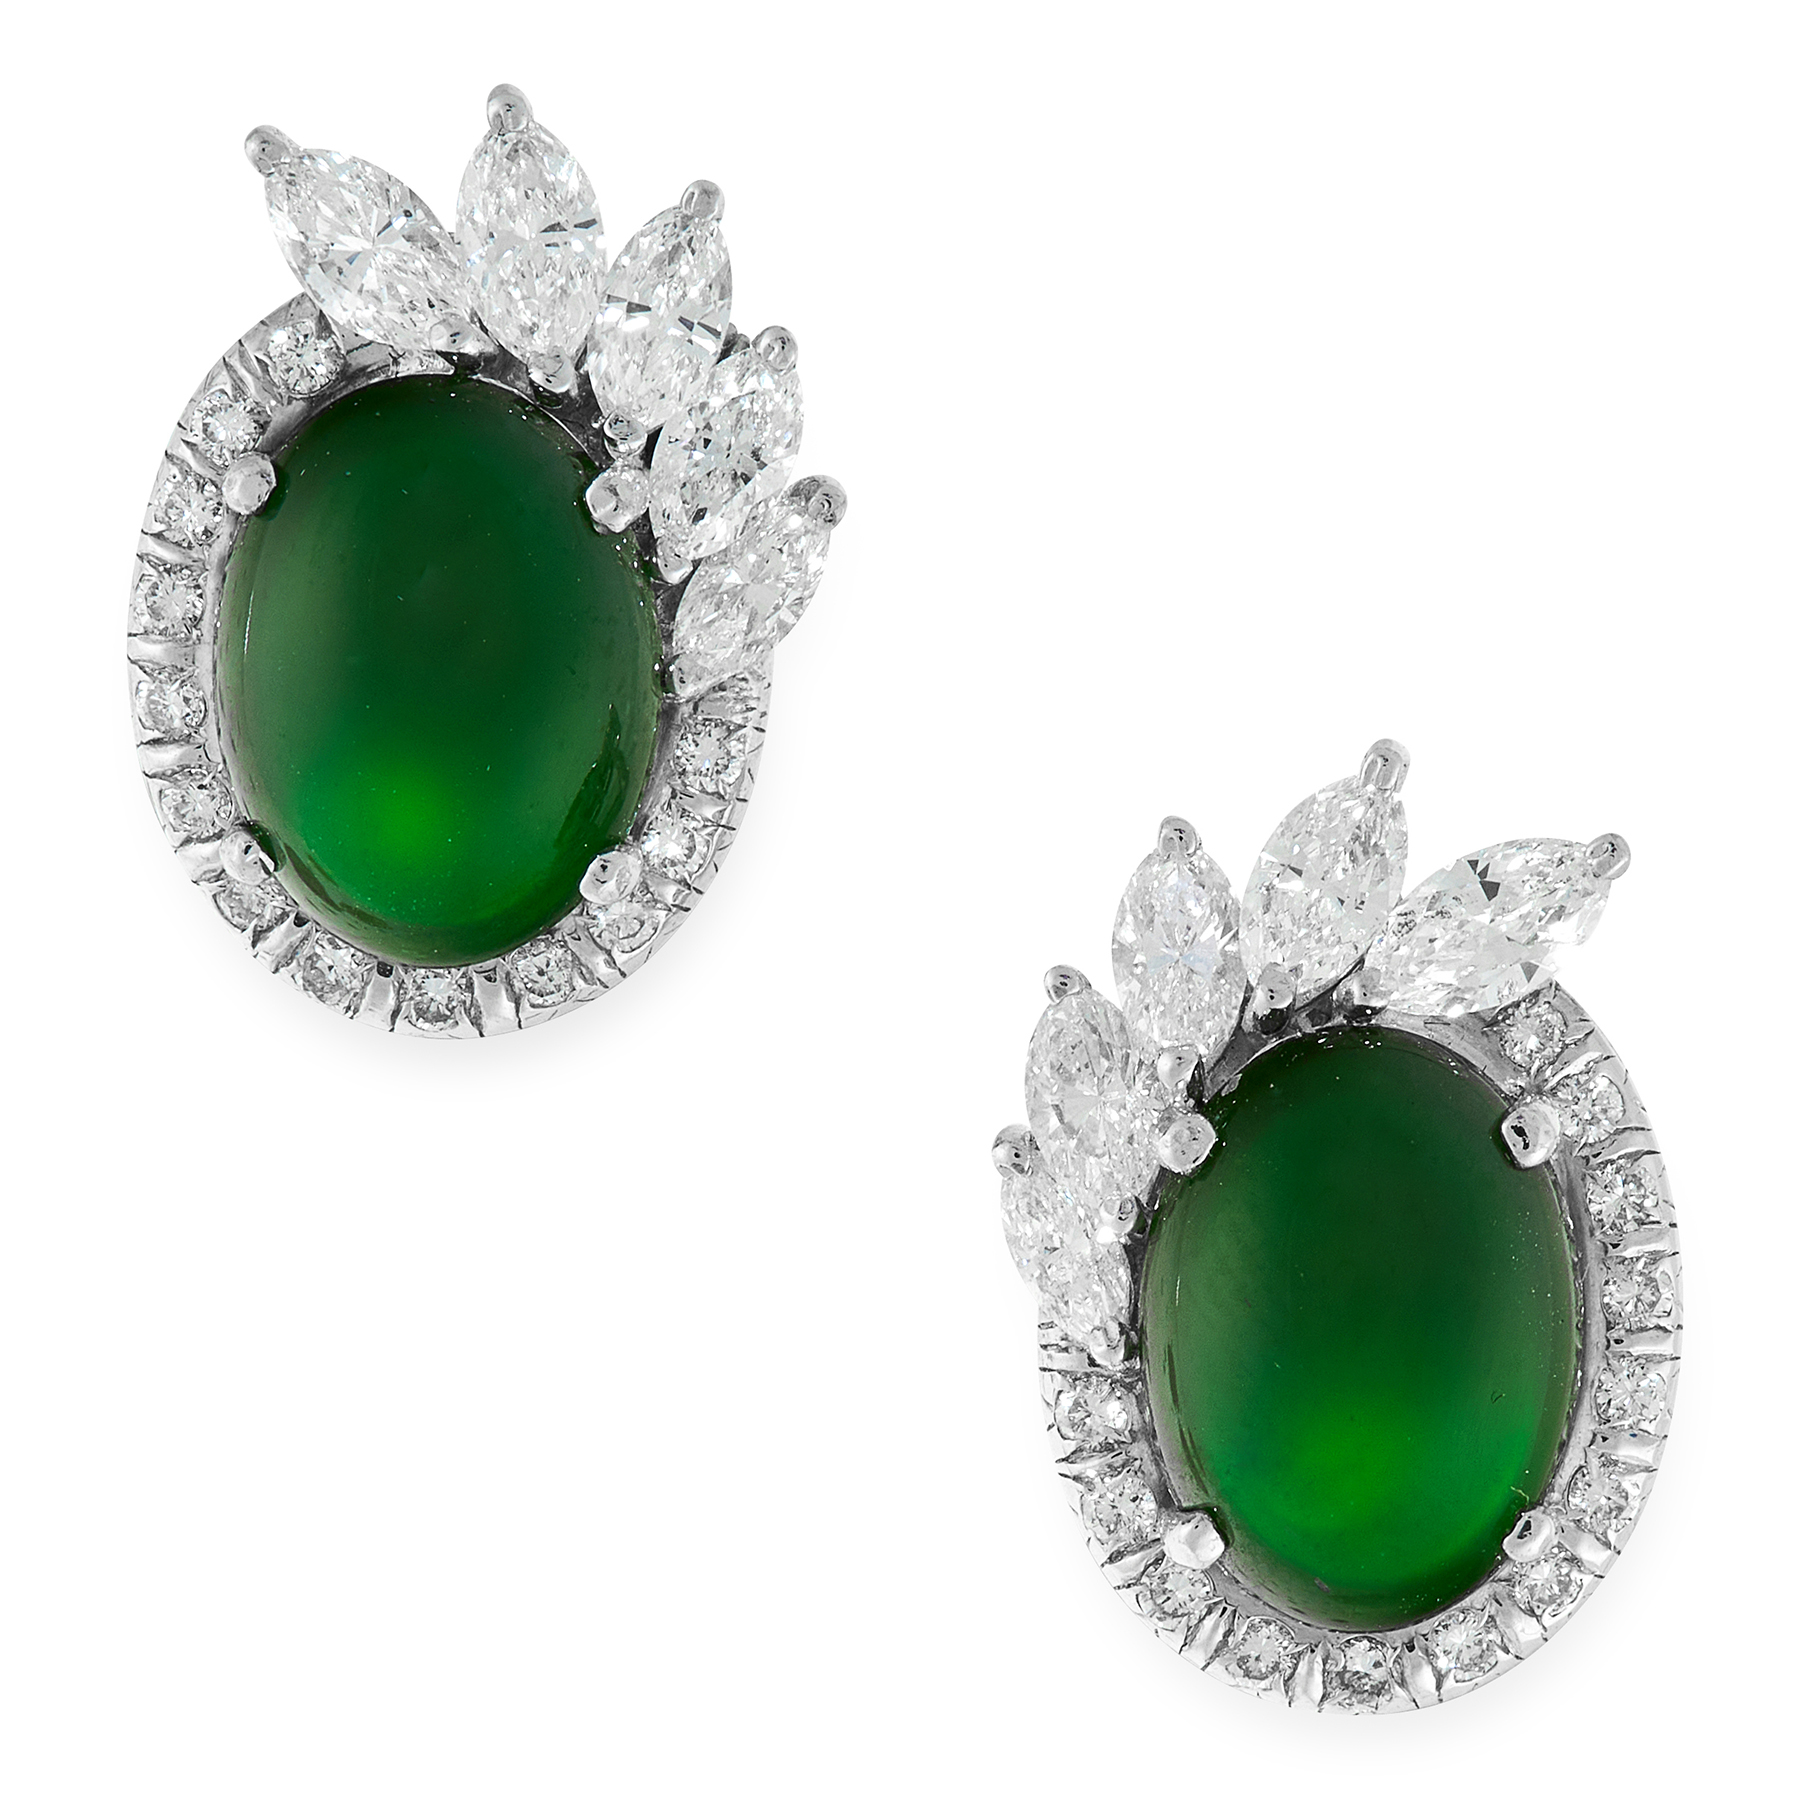 A PAIR OF IMPERIAL JADEITE JADE AND DIAMOND EARRINGS in white gold, each set with an oval jadeite